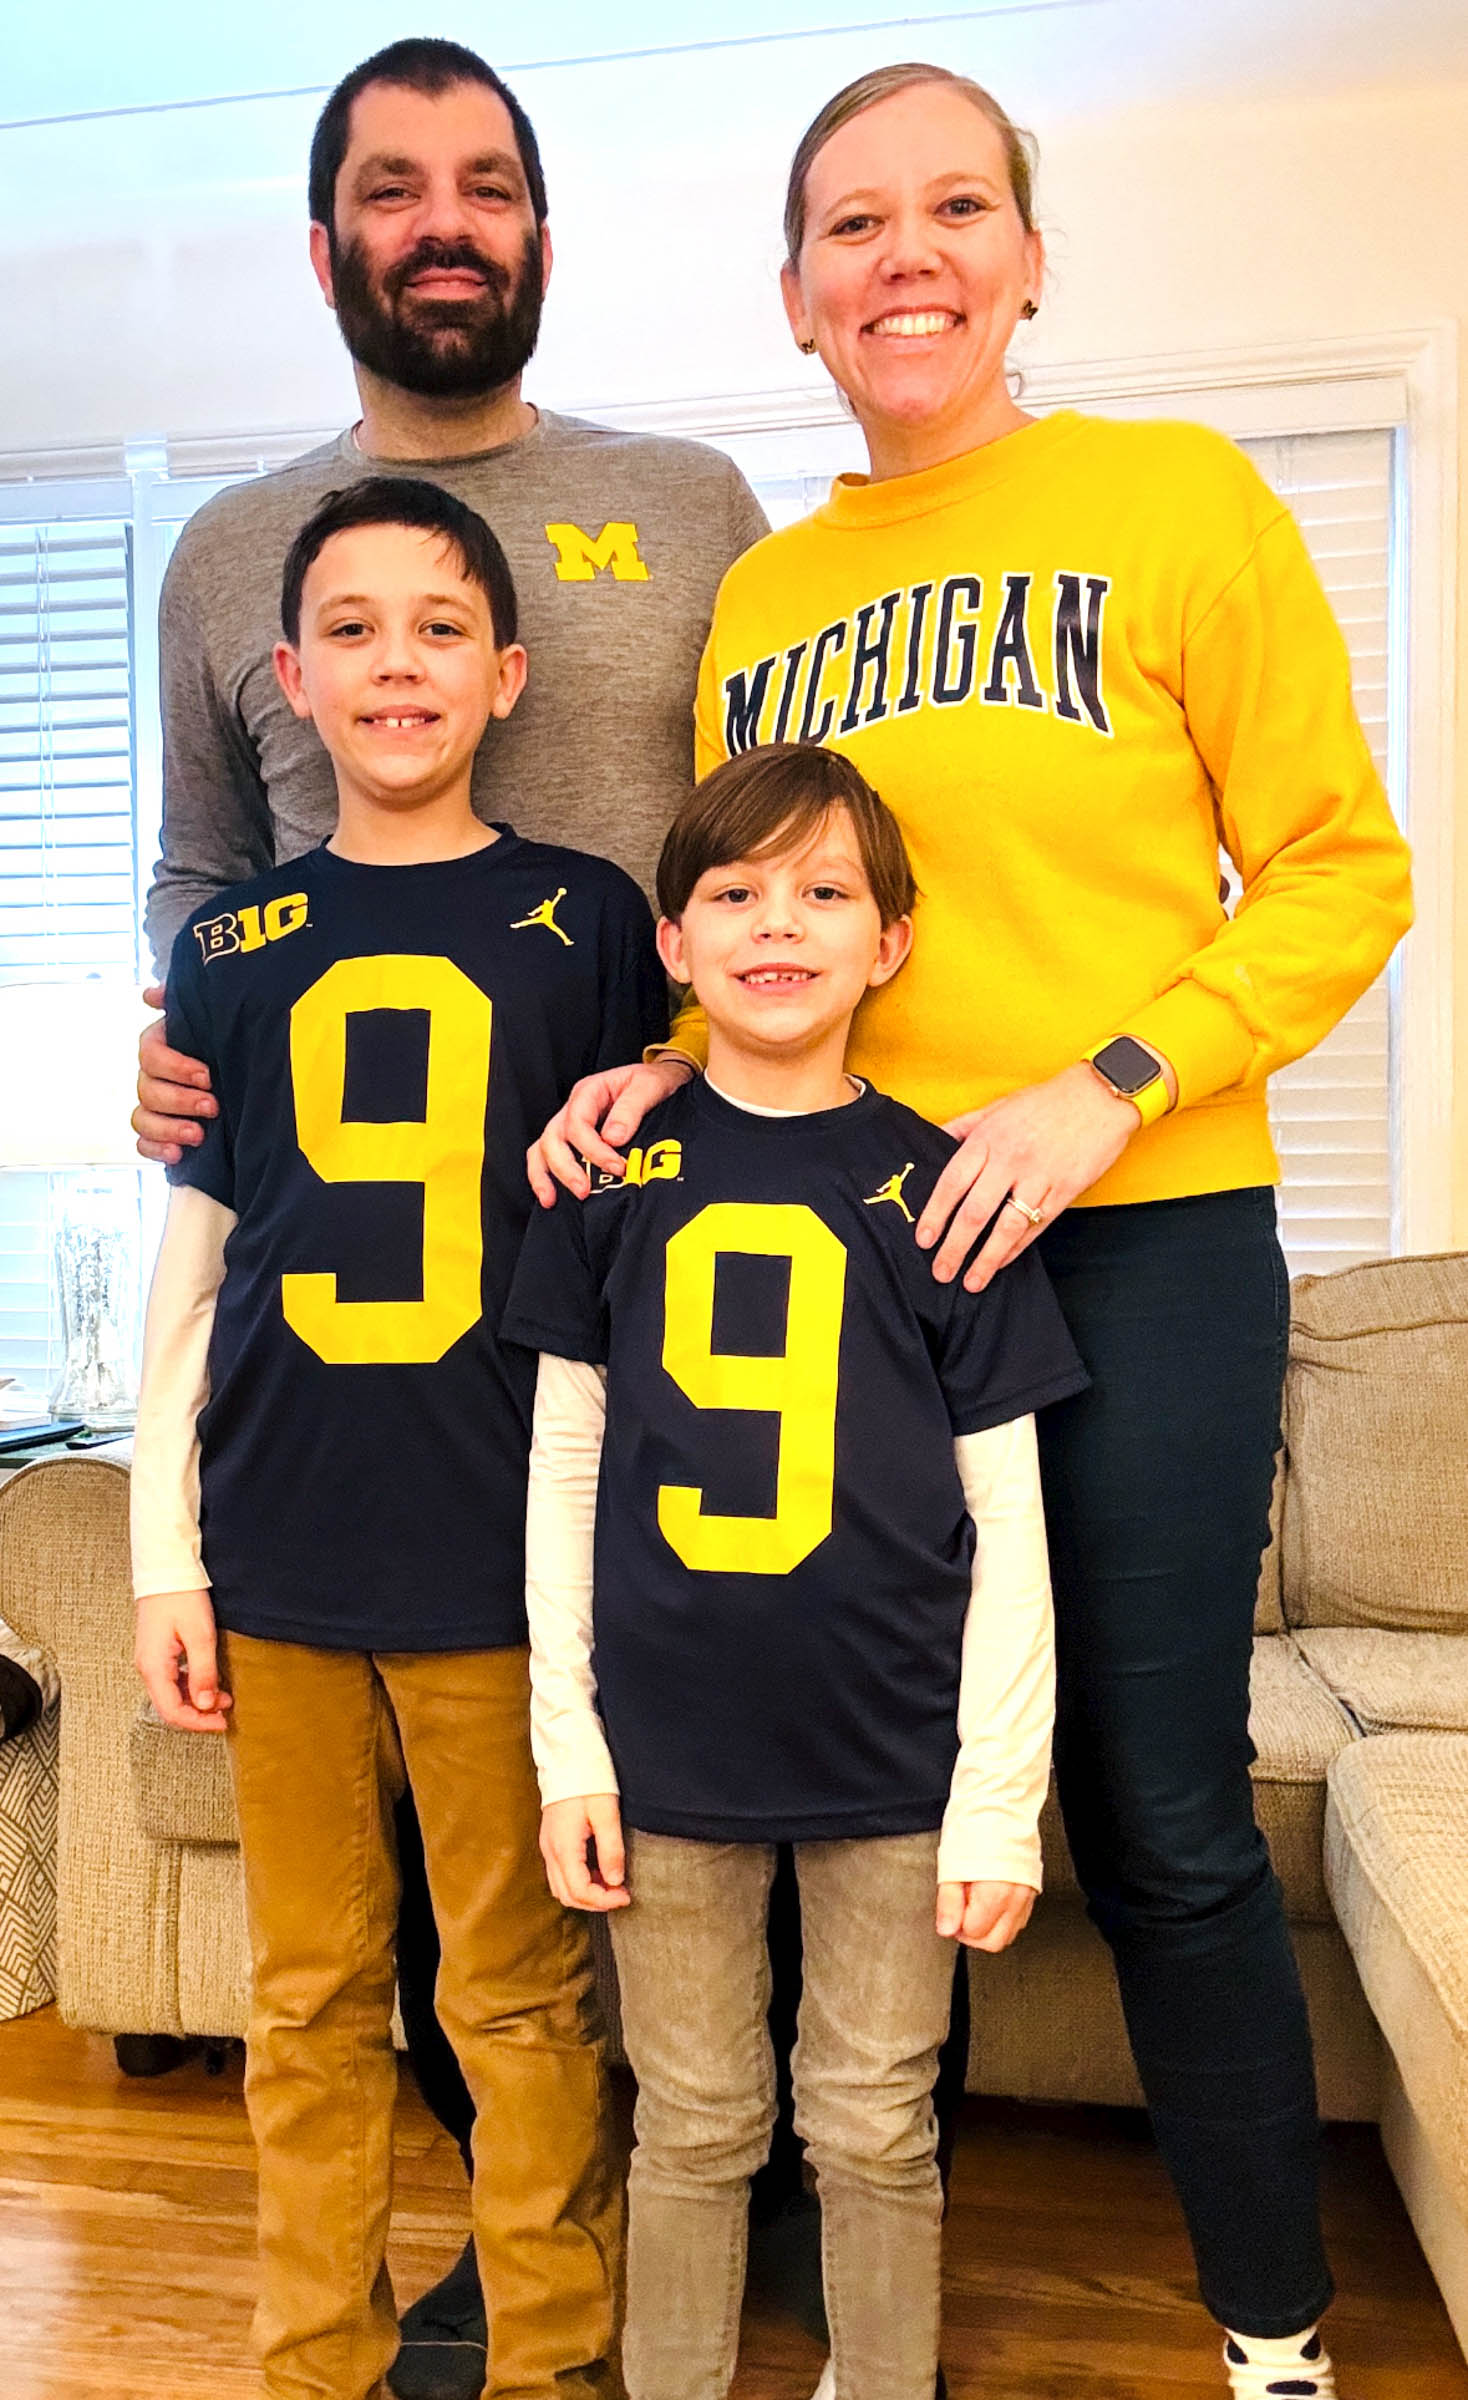 Emily Hutfloetz and Jesse Brady and their two kids pose for a family portrait wearing U-M gear